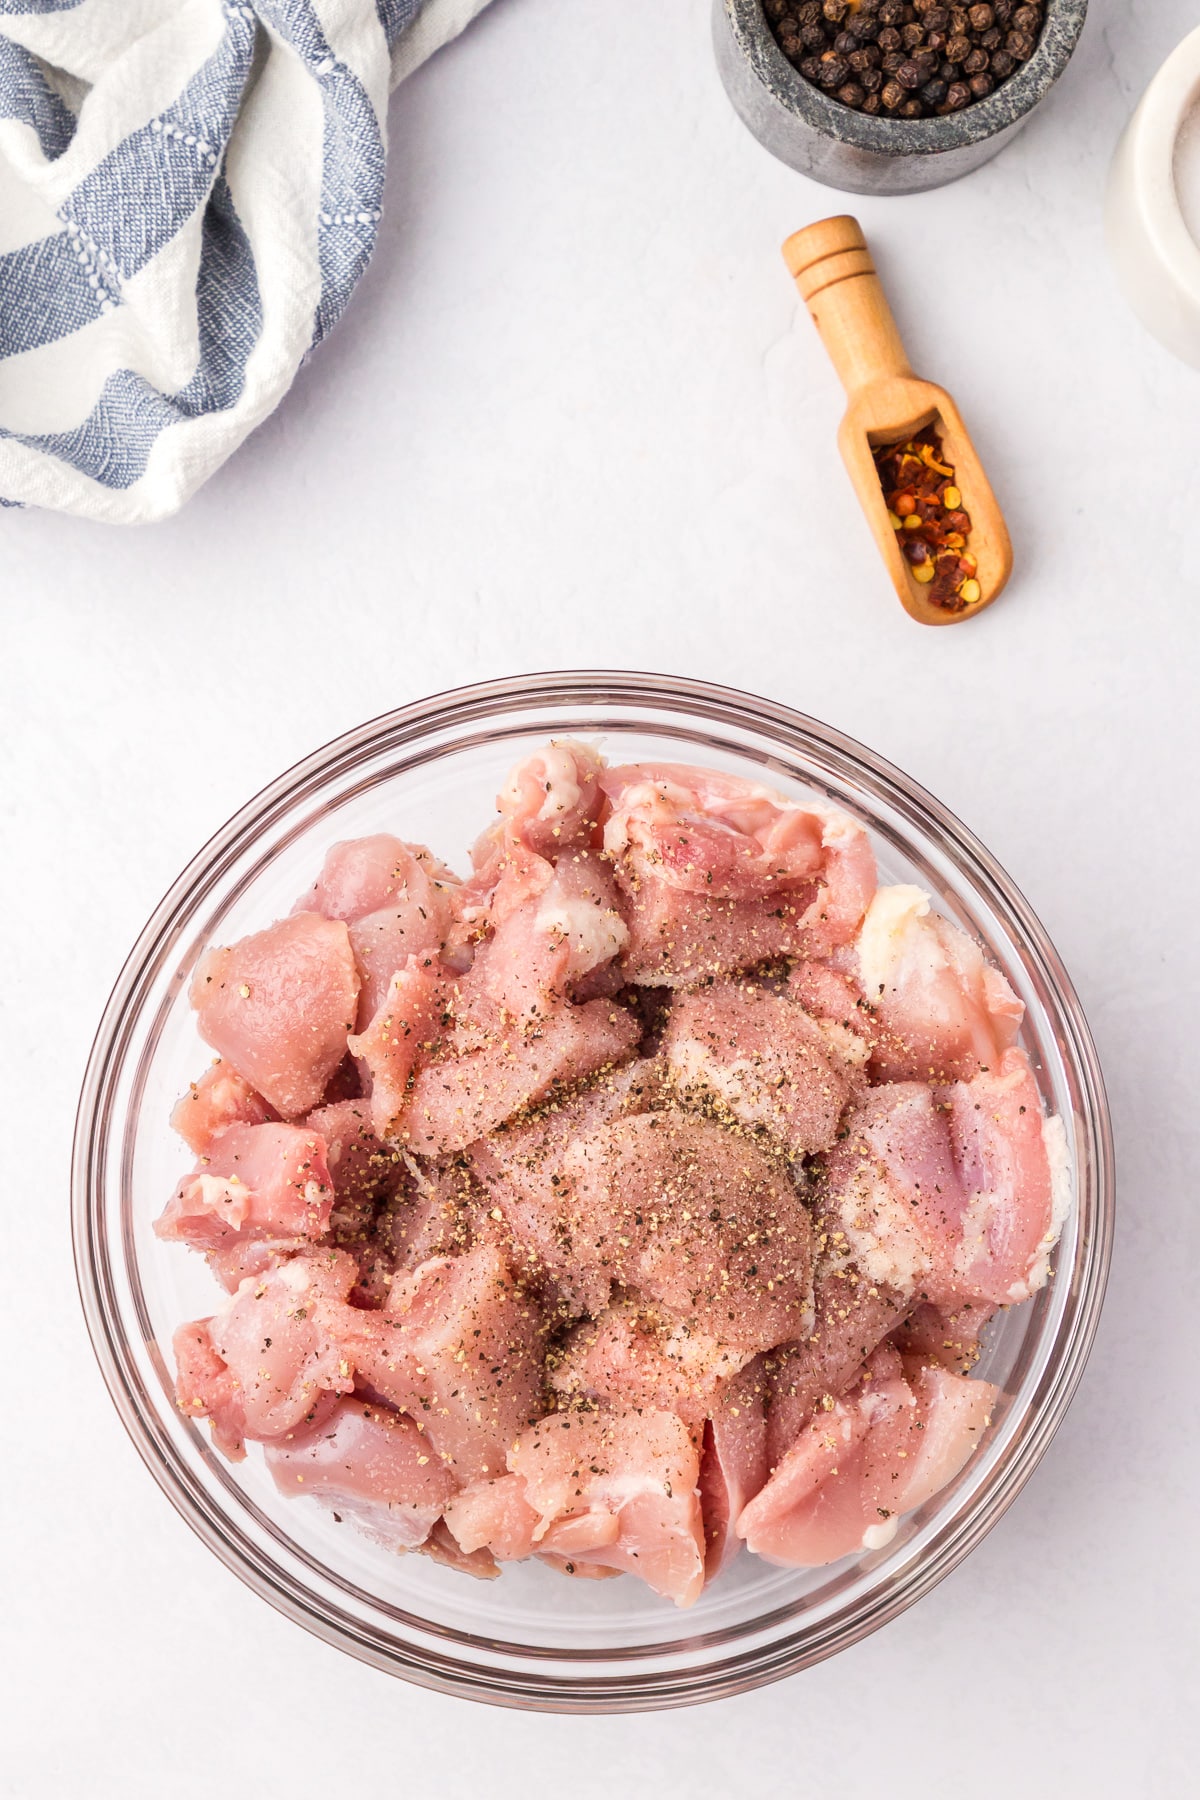 Chopped raw chicken thighs in a glass bowl for creamy chicken and rice seasoned with salt and pepper.